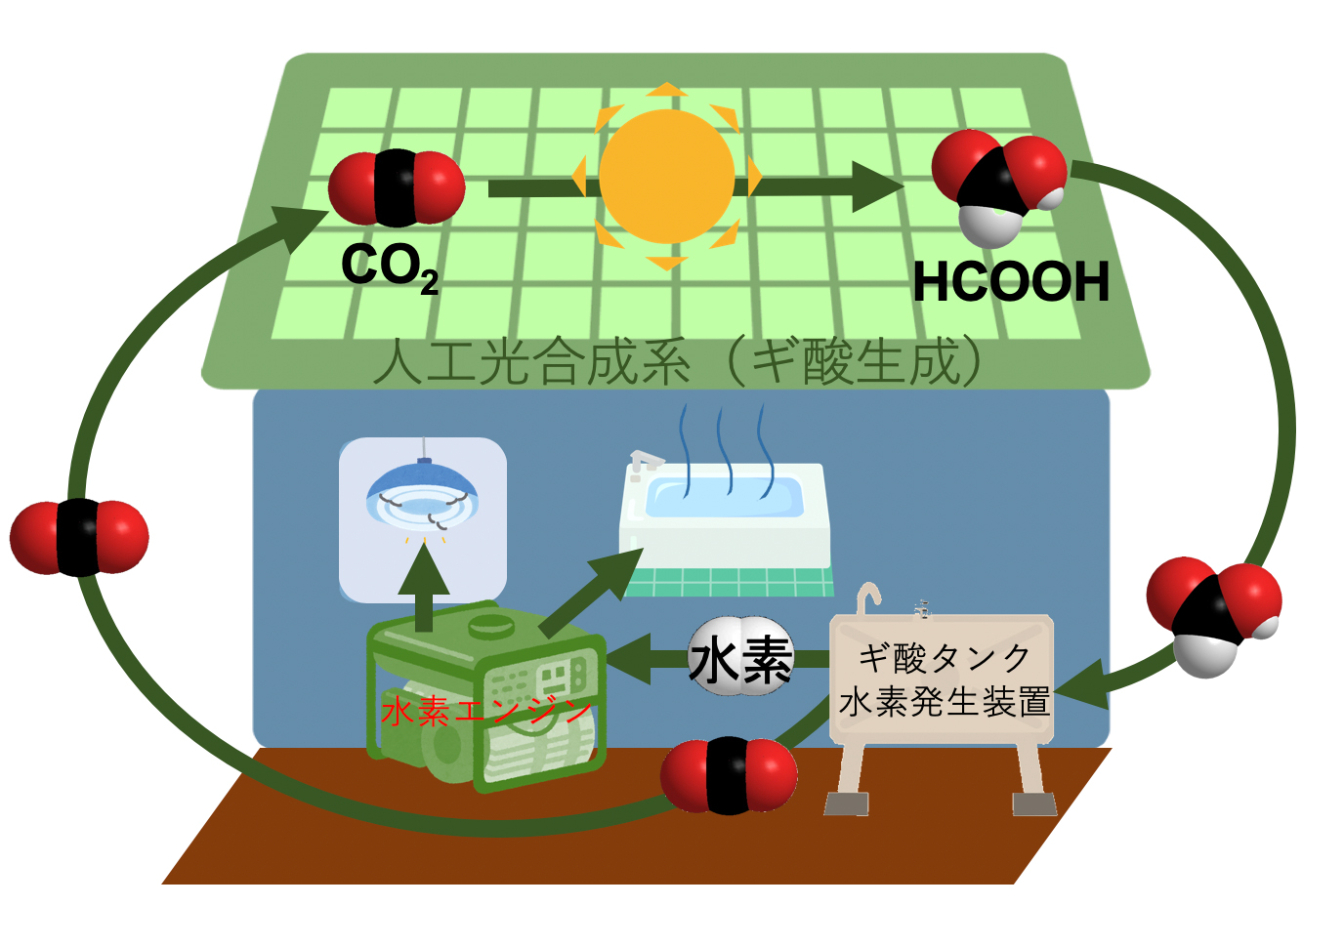 Unlike solar power generation, artificial photosynthesis converts carbon dioxide into formic acid, which is then converted into hydrogen and carbon dioxide as an energy source. The carbon dioxide produced is captured again and returned to the artificial photosynthesis cycle. Courtesy: Osaka City University Research Center for Artificial Photosynthesis